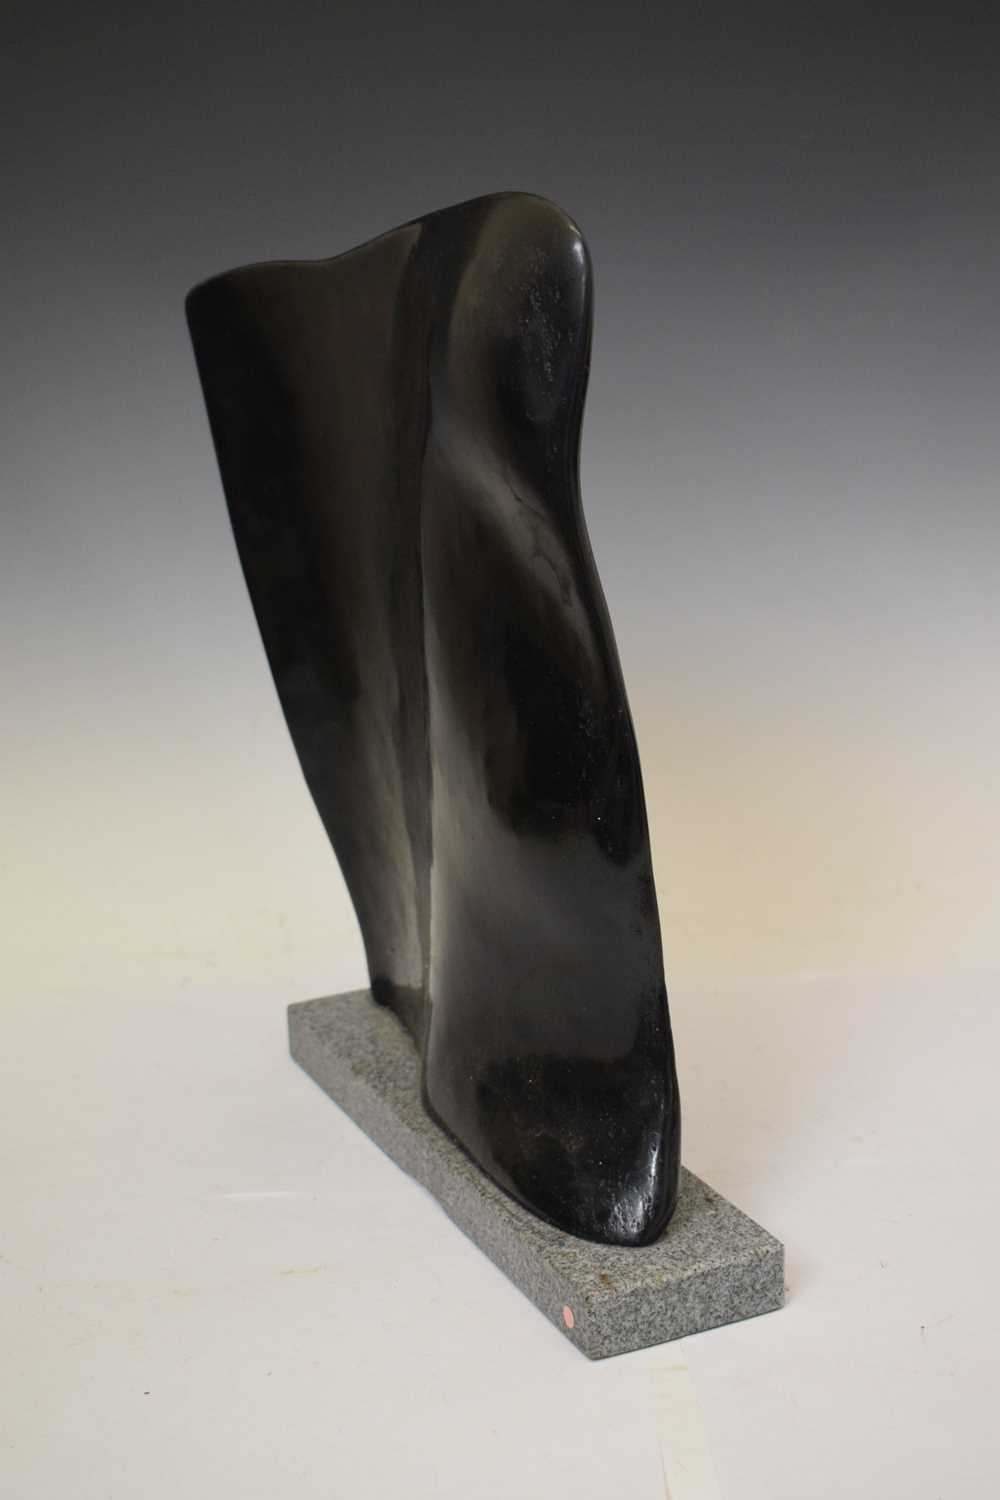 Modernist abstract sculpture - Image 7 of 9